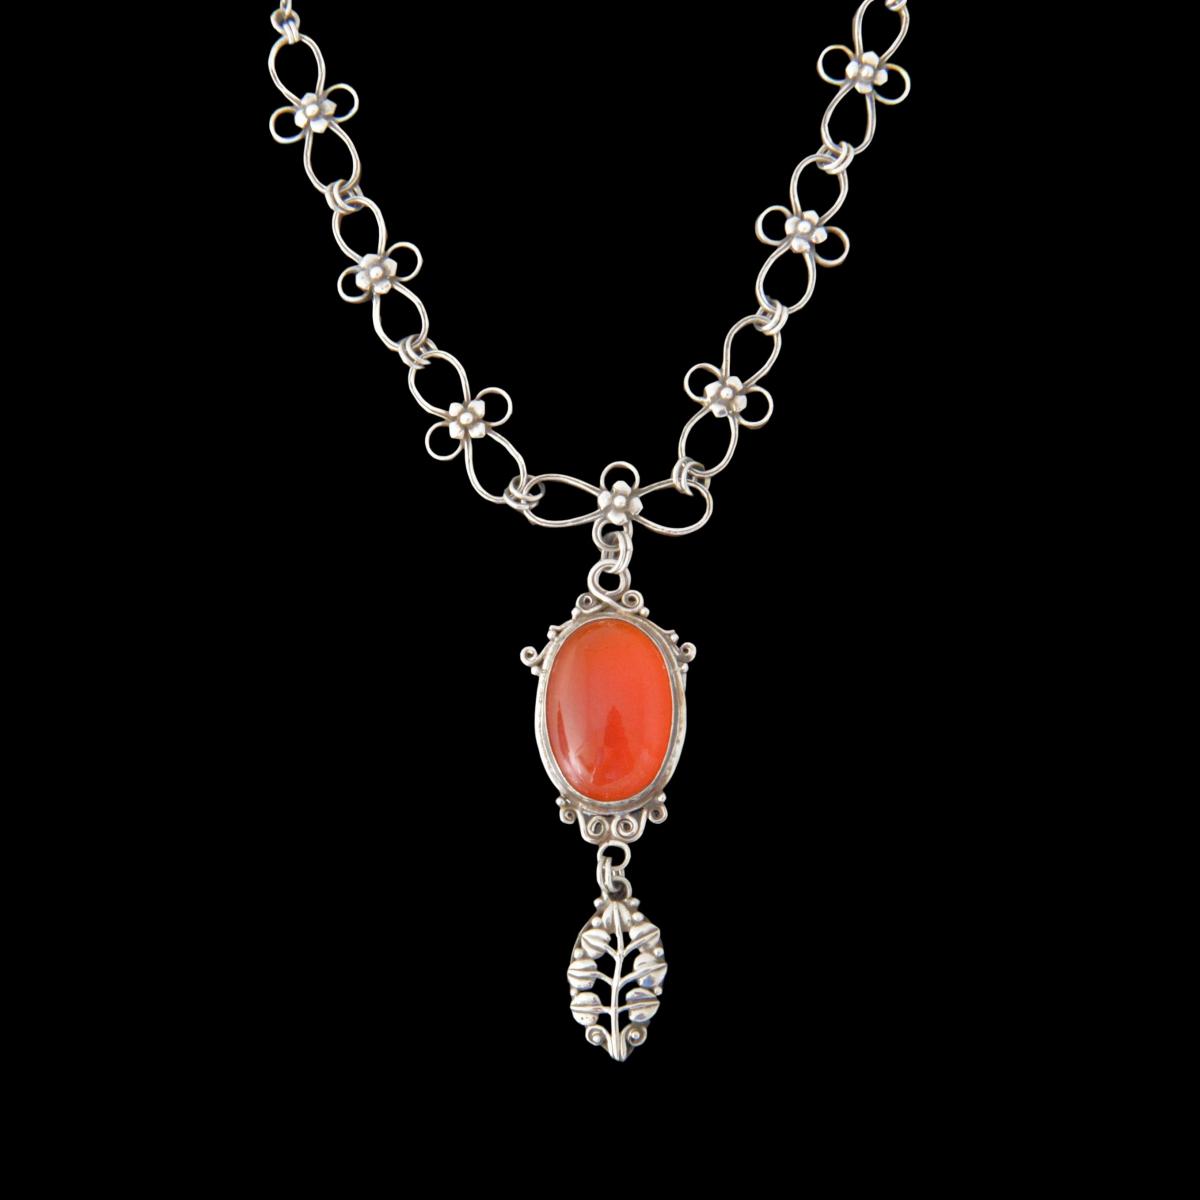 An agate silver pendant attributed to the Artificers Guild